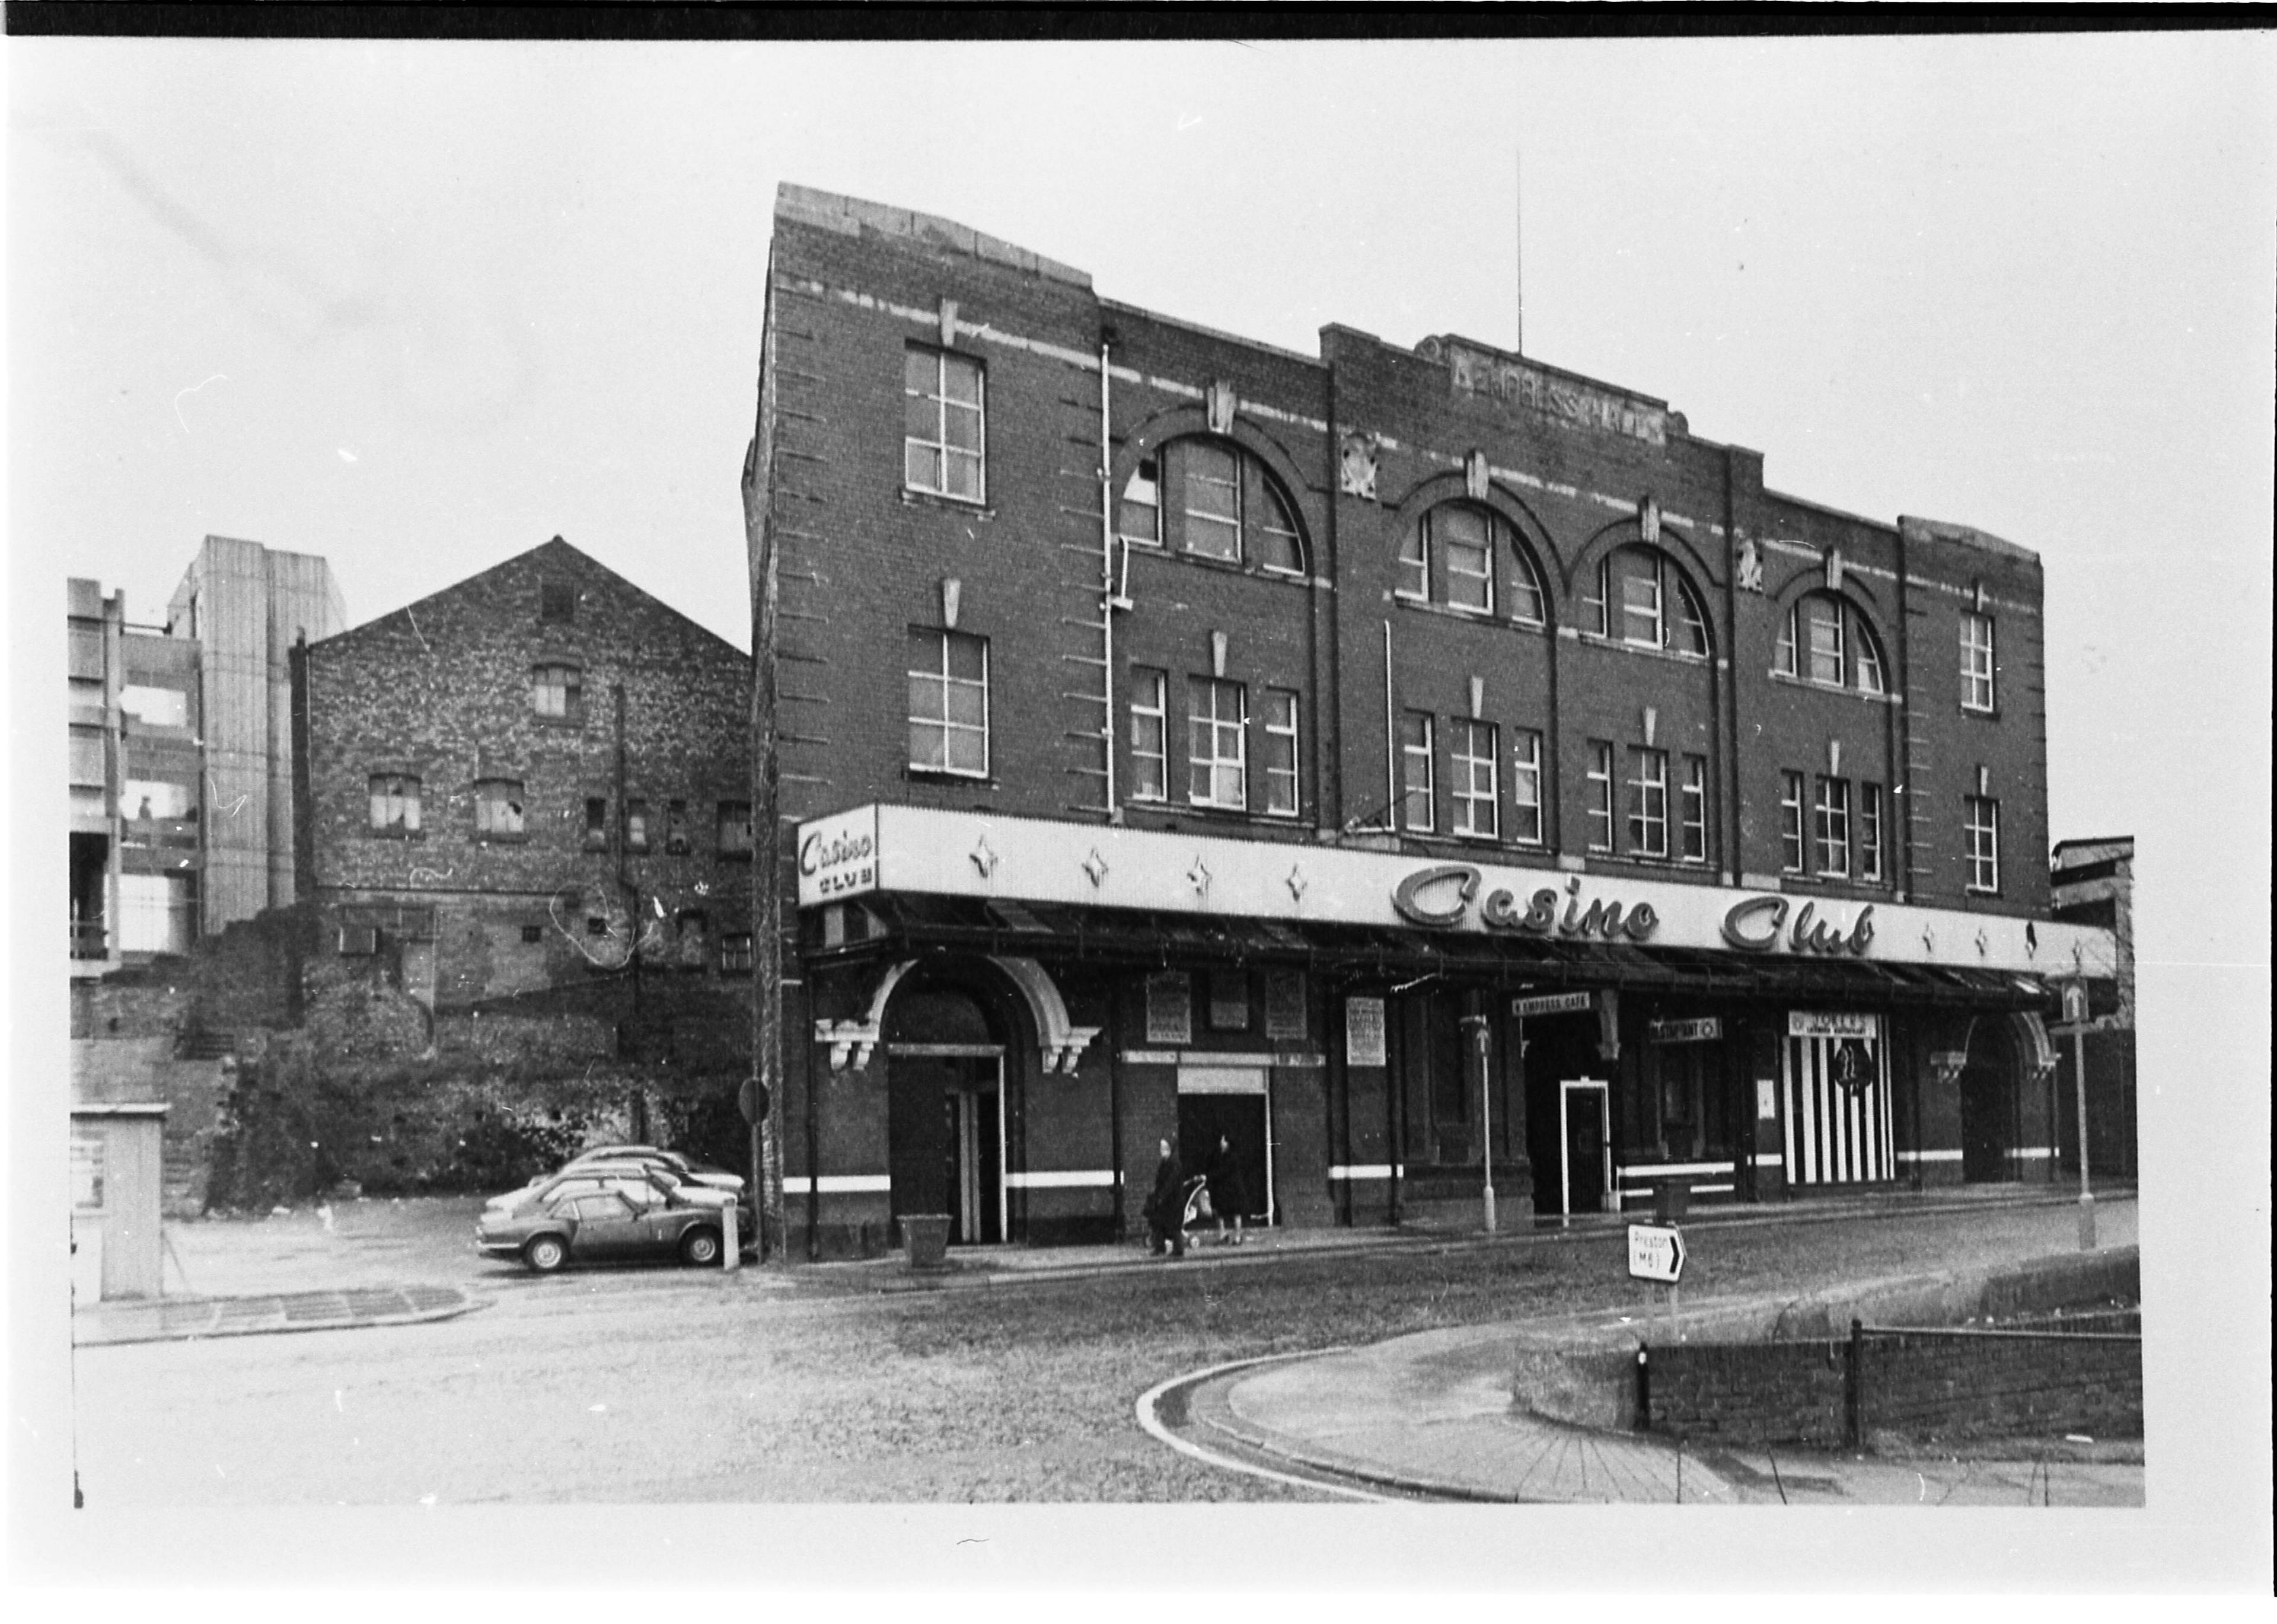 Old black and white image of an old building: 'Casino Club'